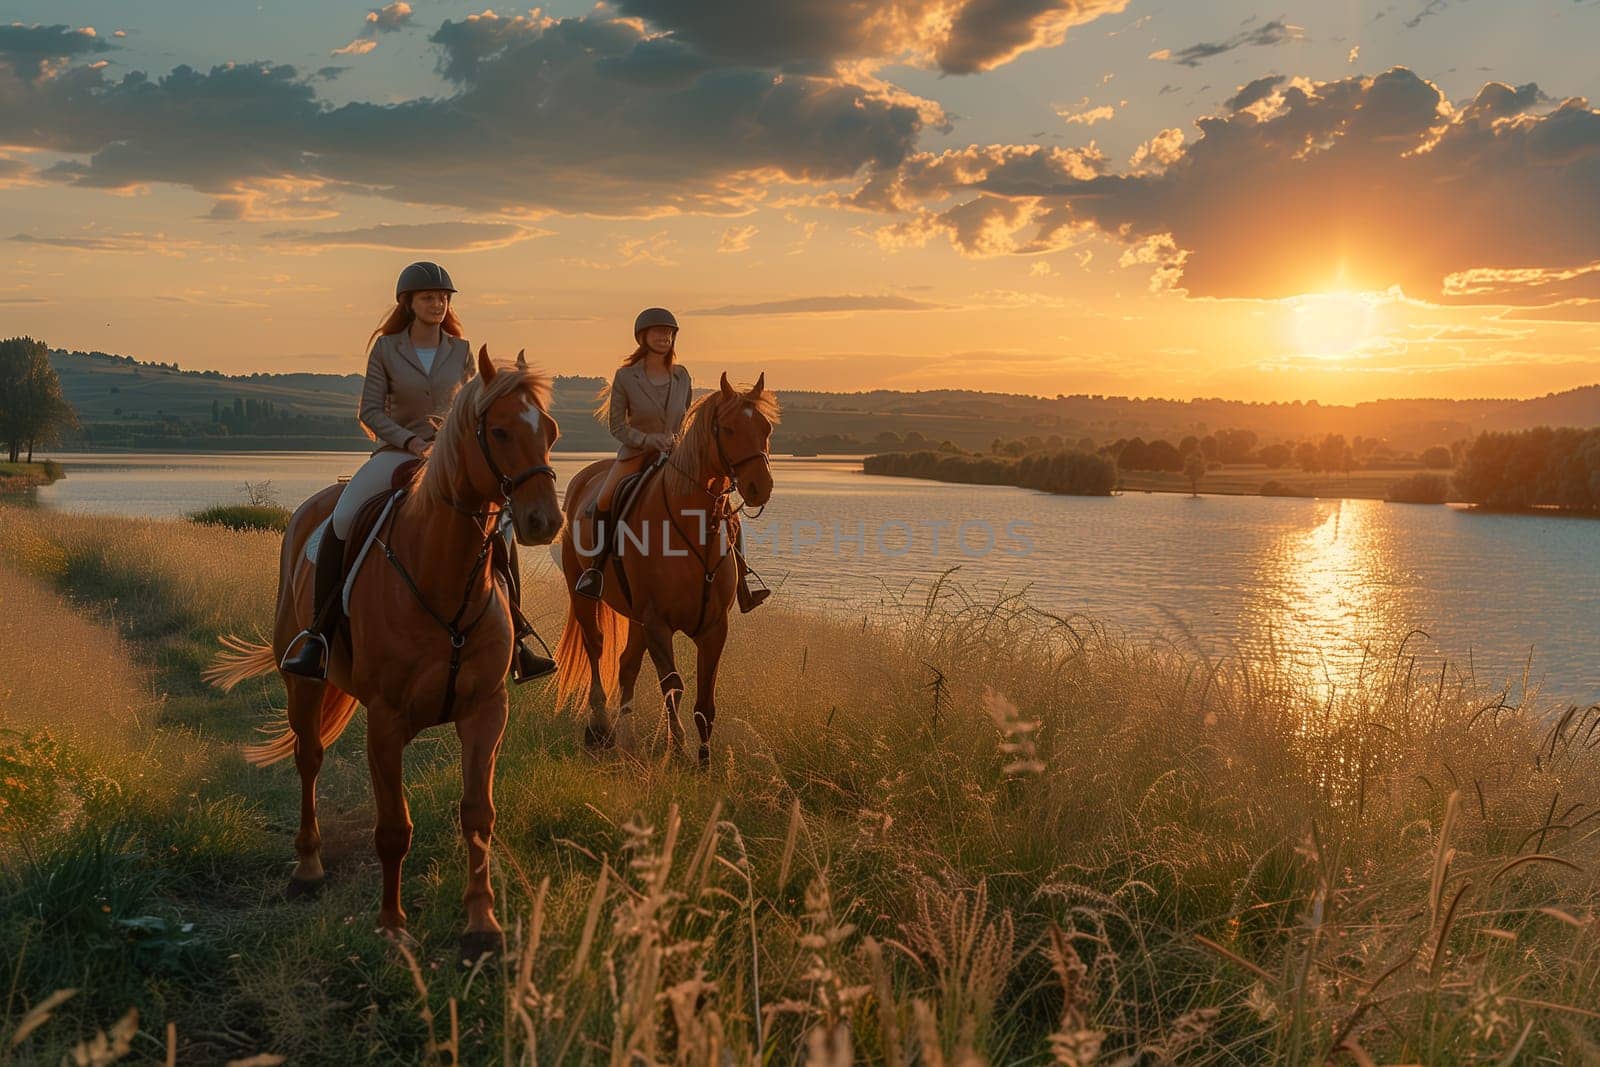 A couple of individuals are seen riding on the backs of horses together, enjoying a shared equestrian experience.